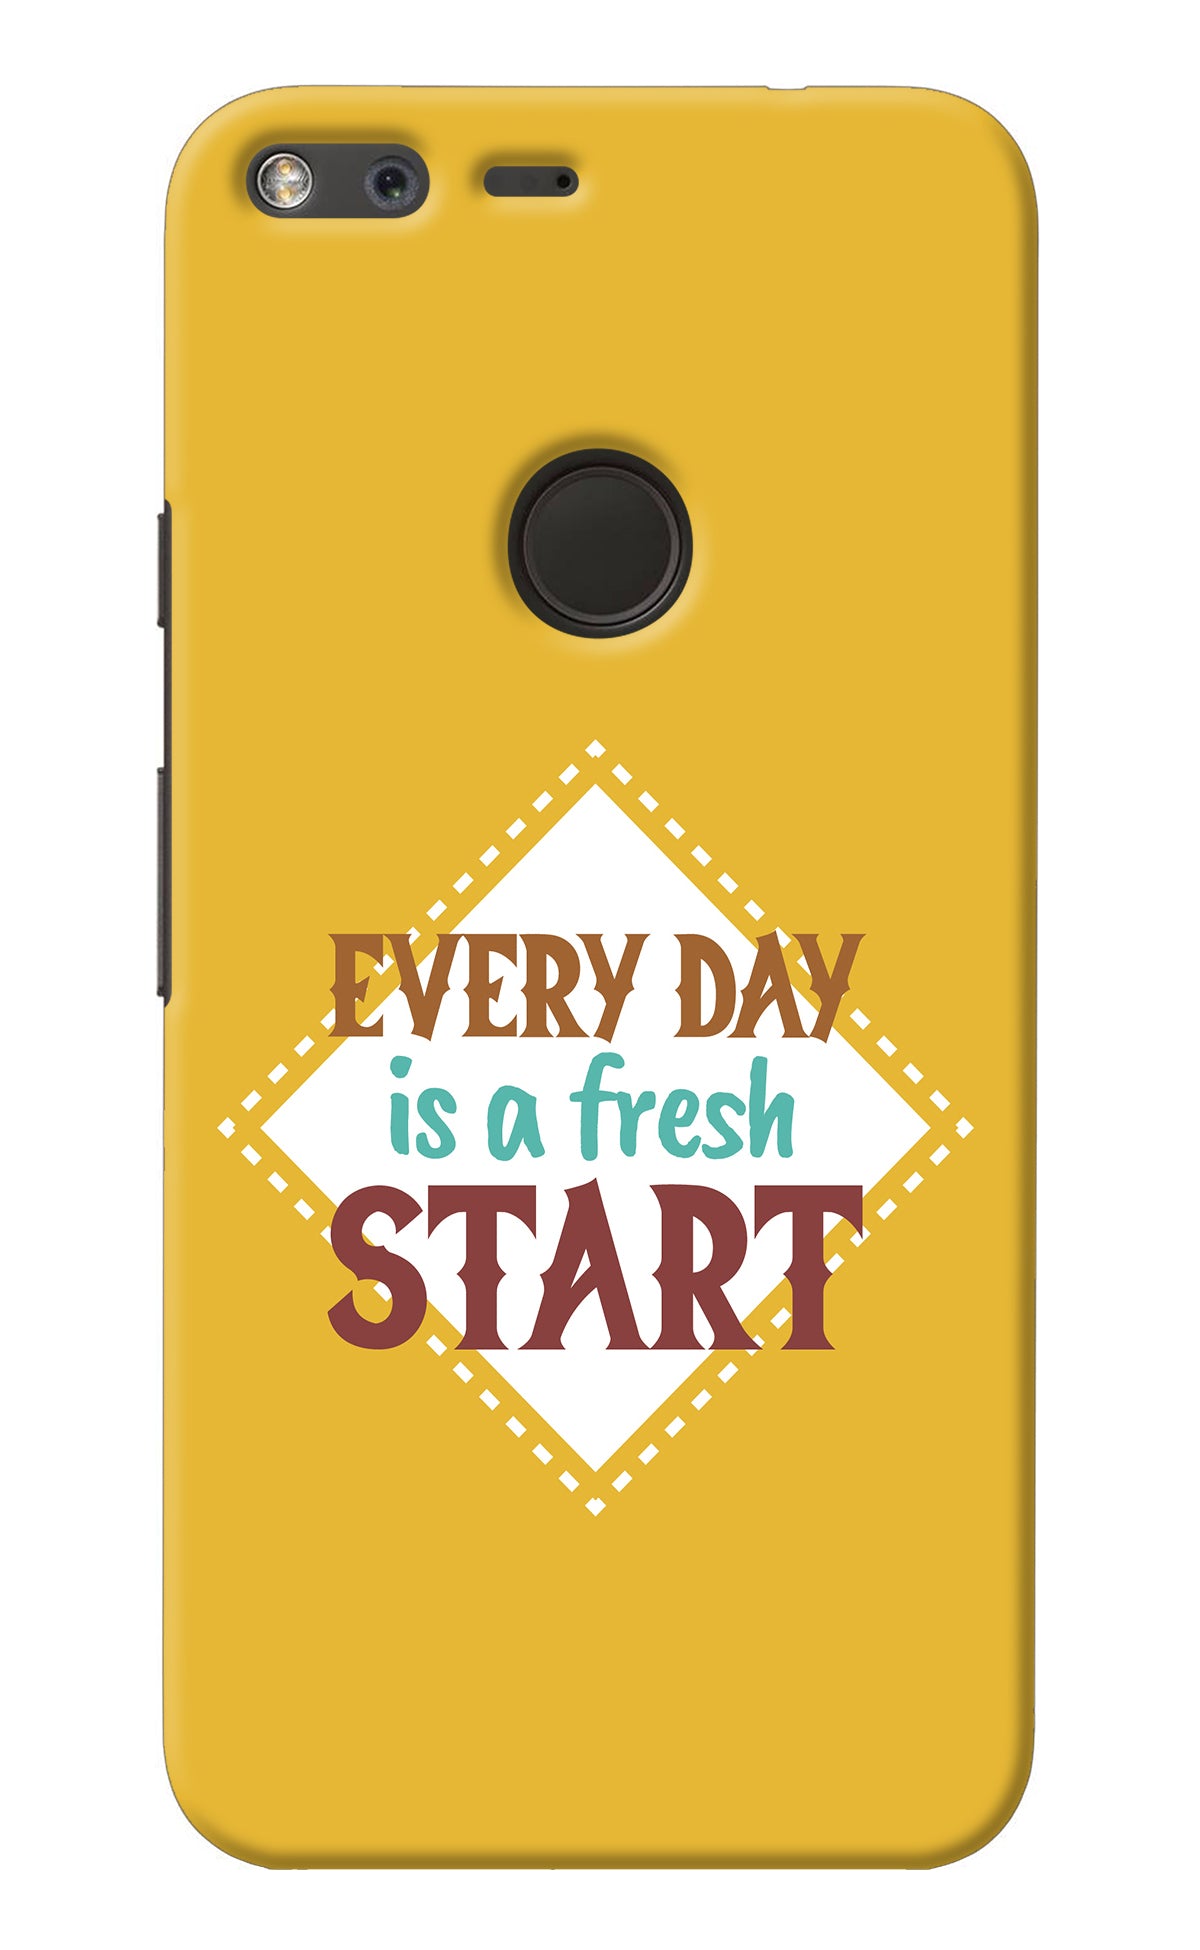 Every day is a Fresh Start Google Pixel XL Back Cover